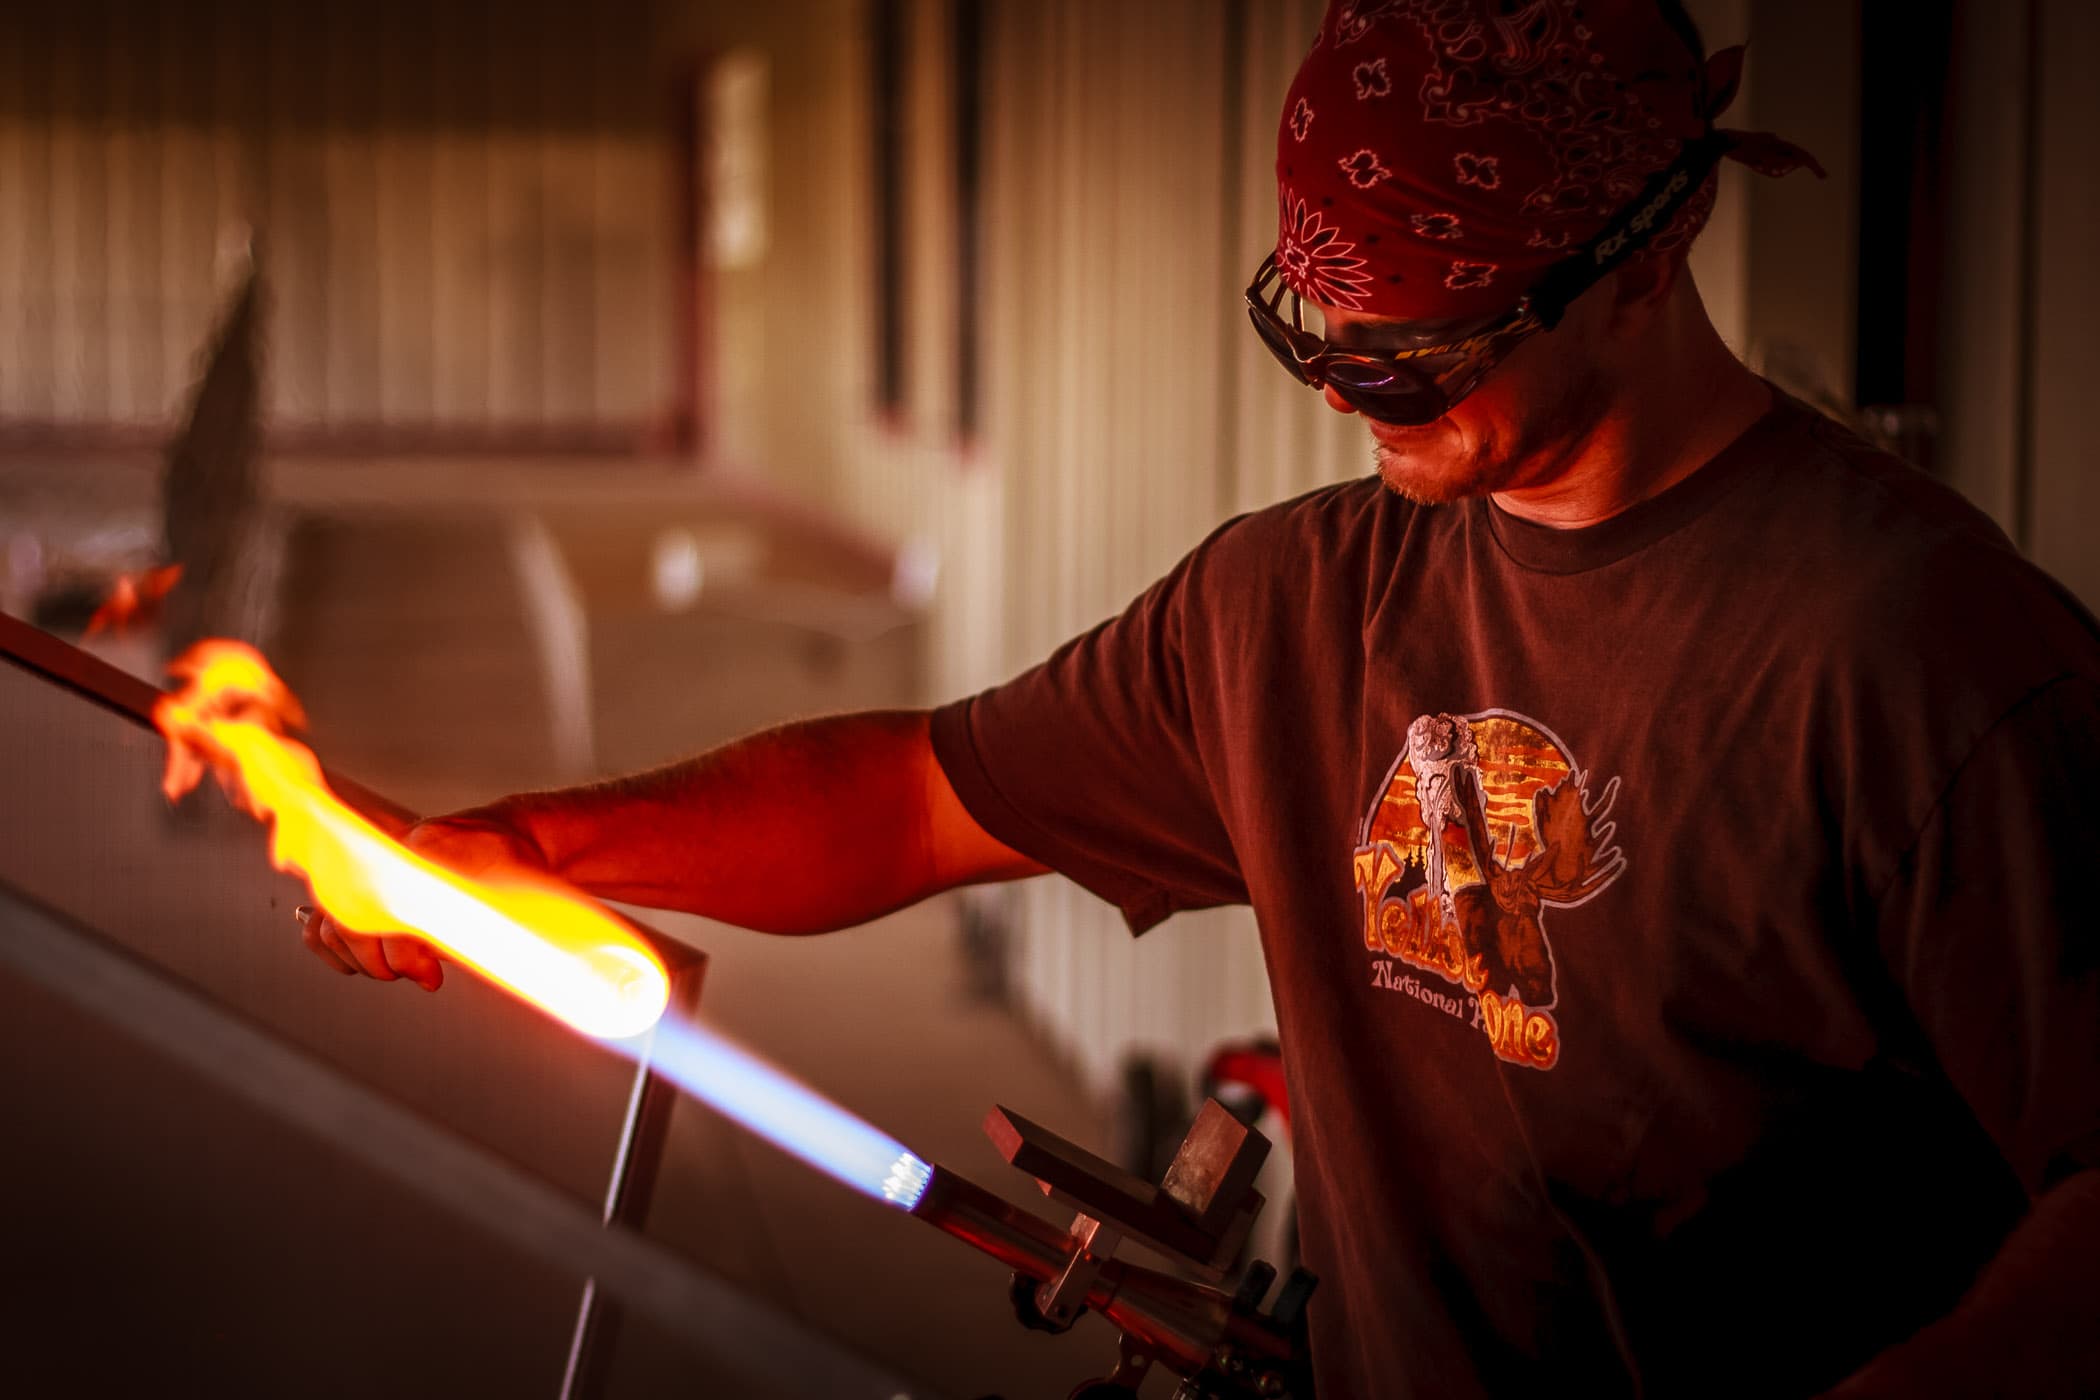 An artisan shapes molten glass at the Vetro Glass Studio in Grapevine, Texas.